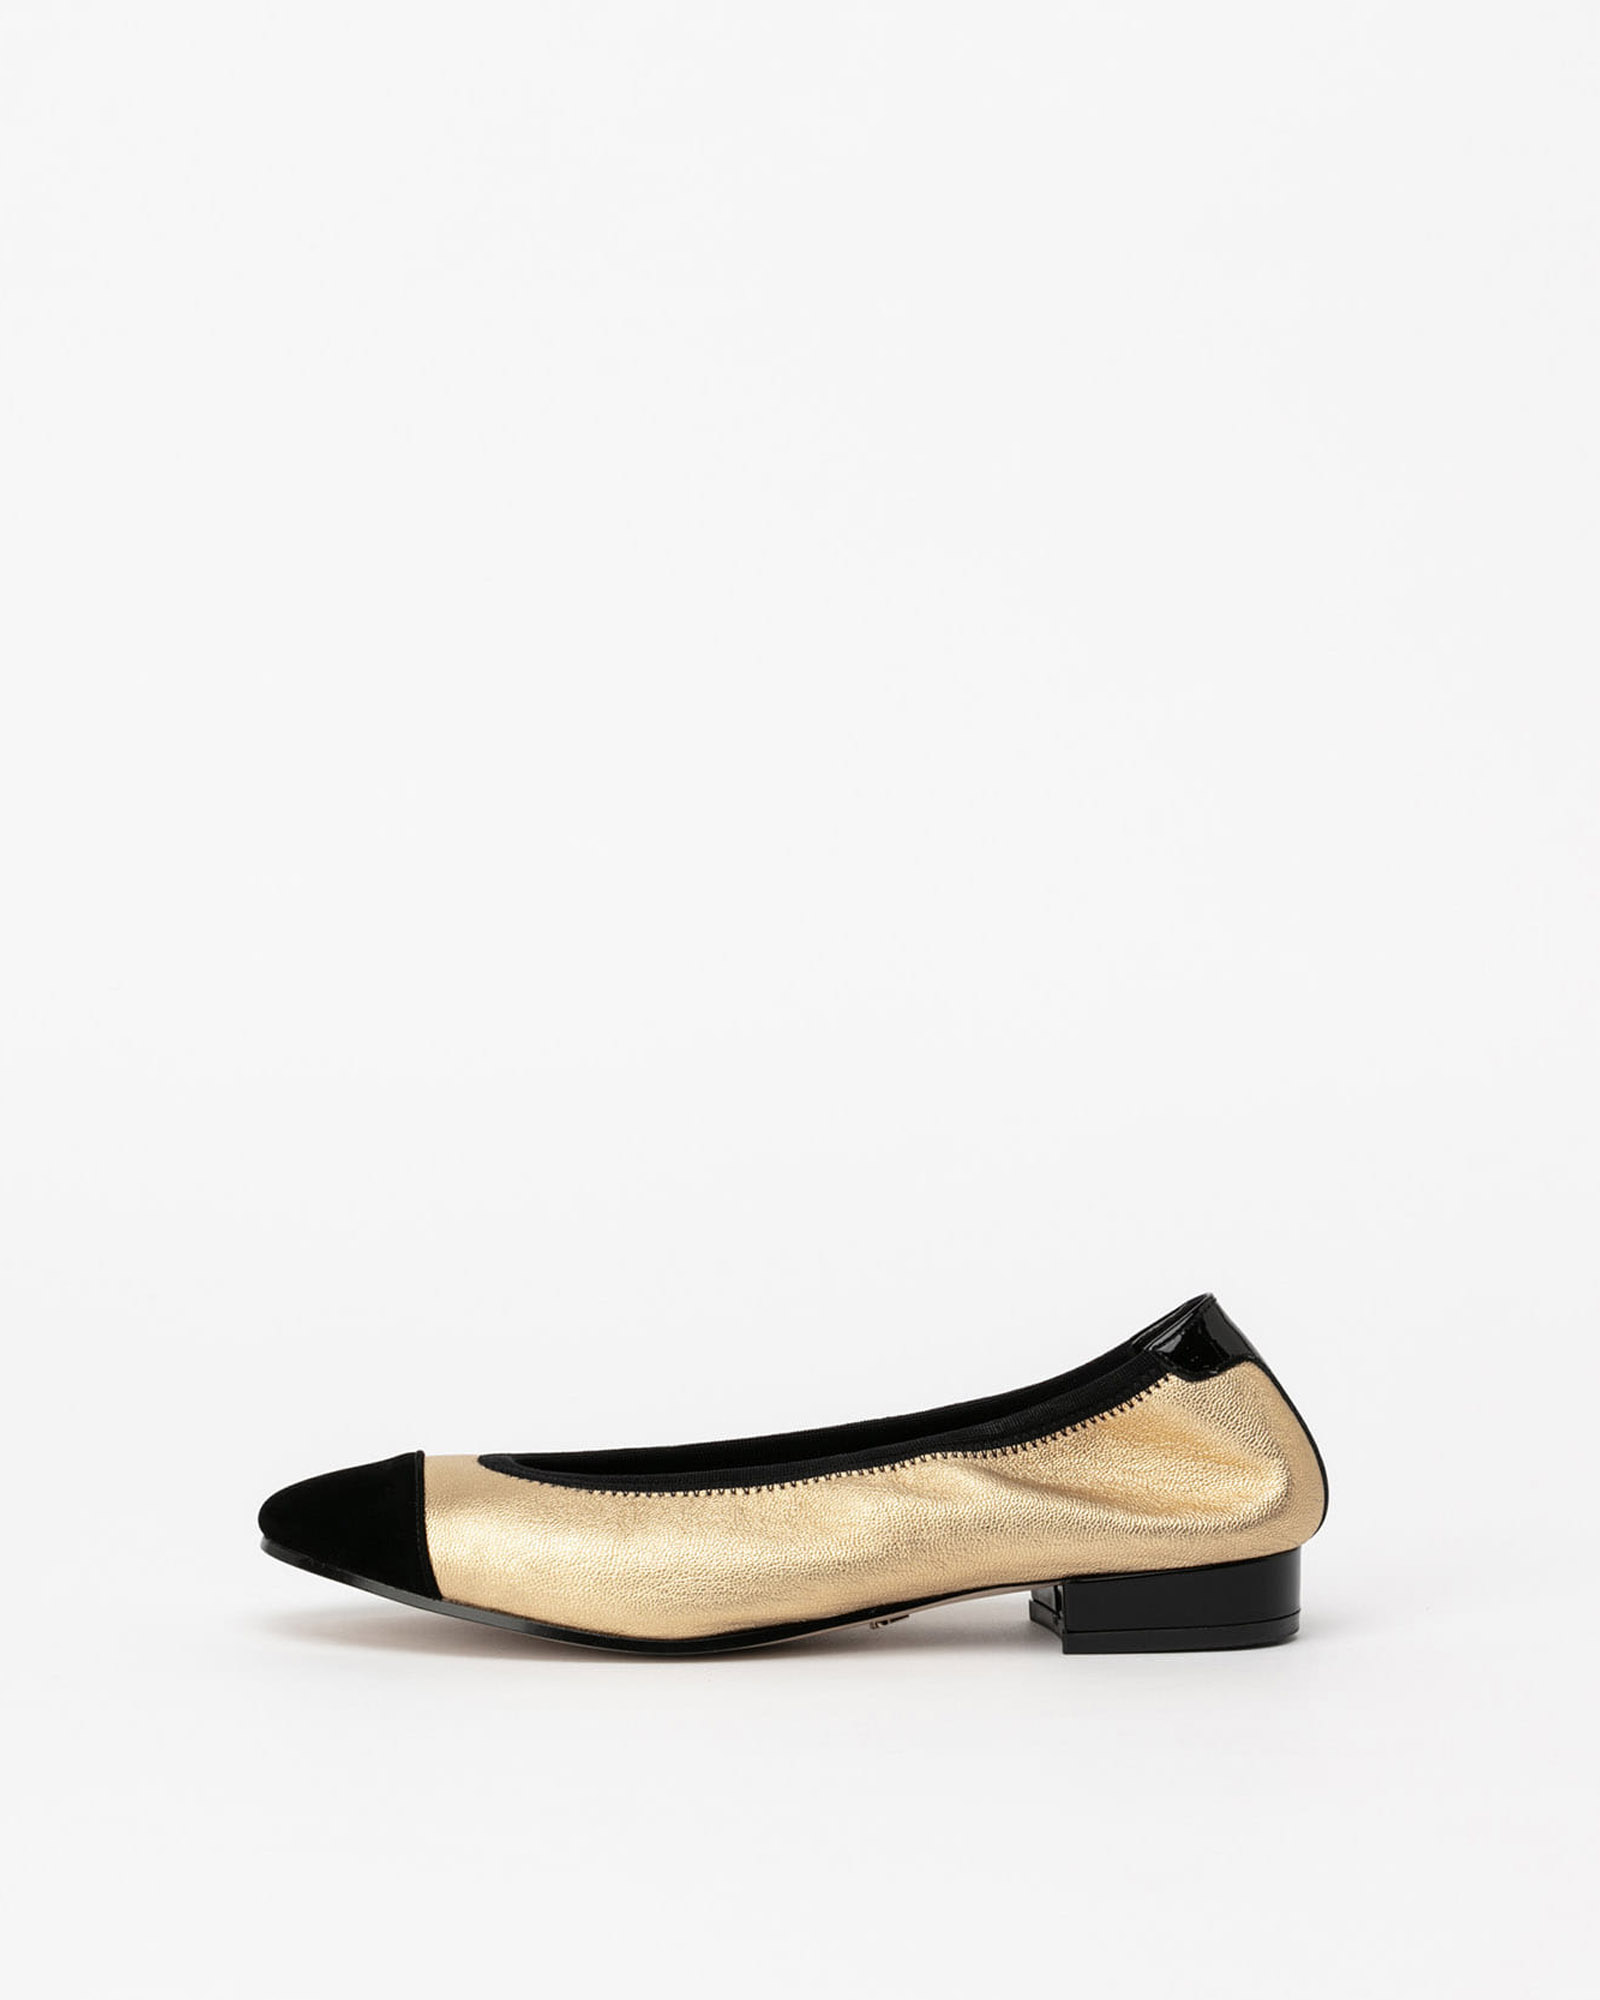 D&#039;amore Flat Shoes in Gold with Black Toe